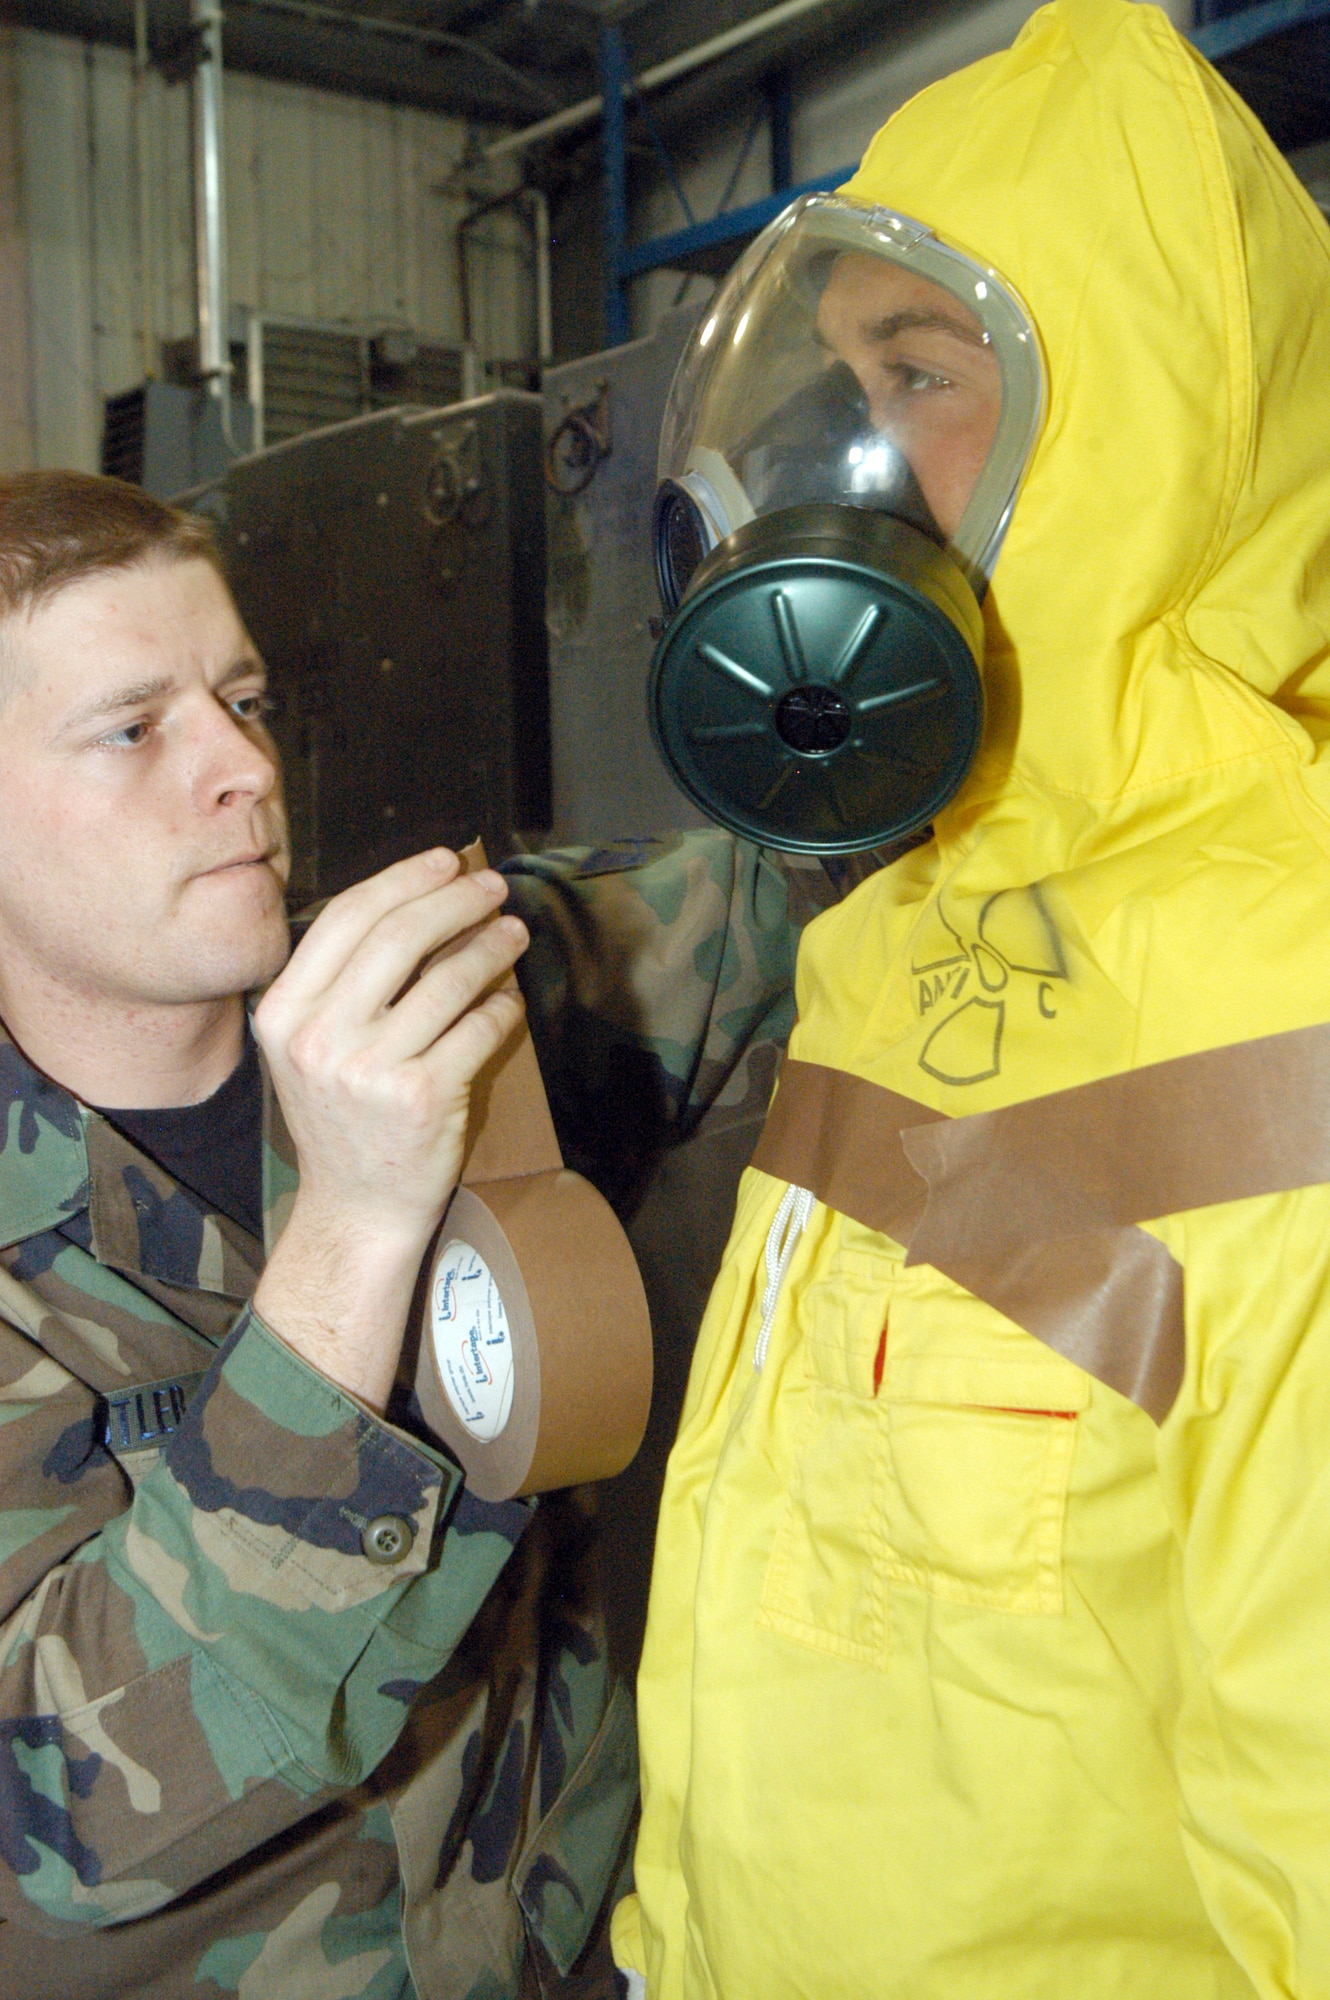 Senior Airman Chris Butler, a Readiness Flight readiness logistics journeyman, tapes loose edges of an anti-C (radiation suit) worn by Senior Airman Nick Pompa to minimize skin exposure. U.S. Air Force photo by Sue Sapp. 
